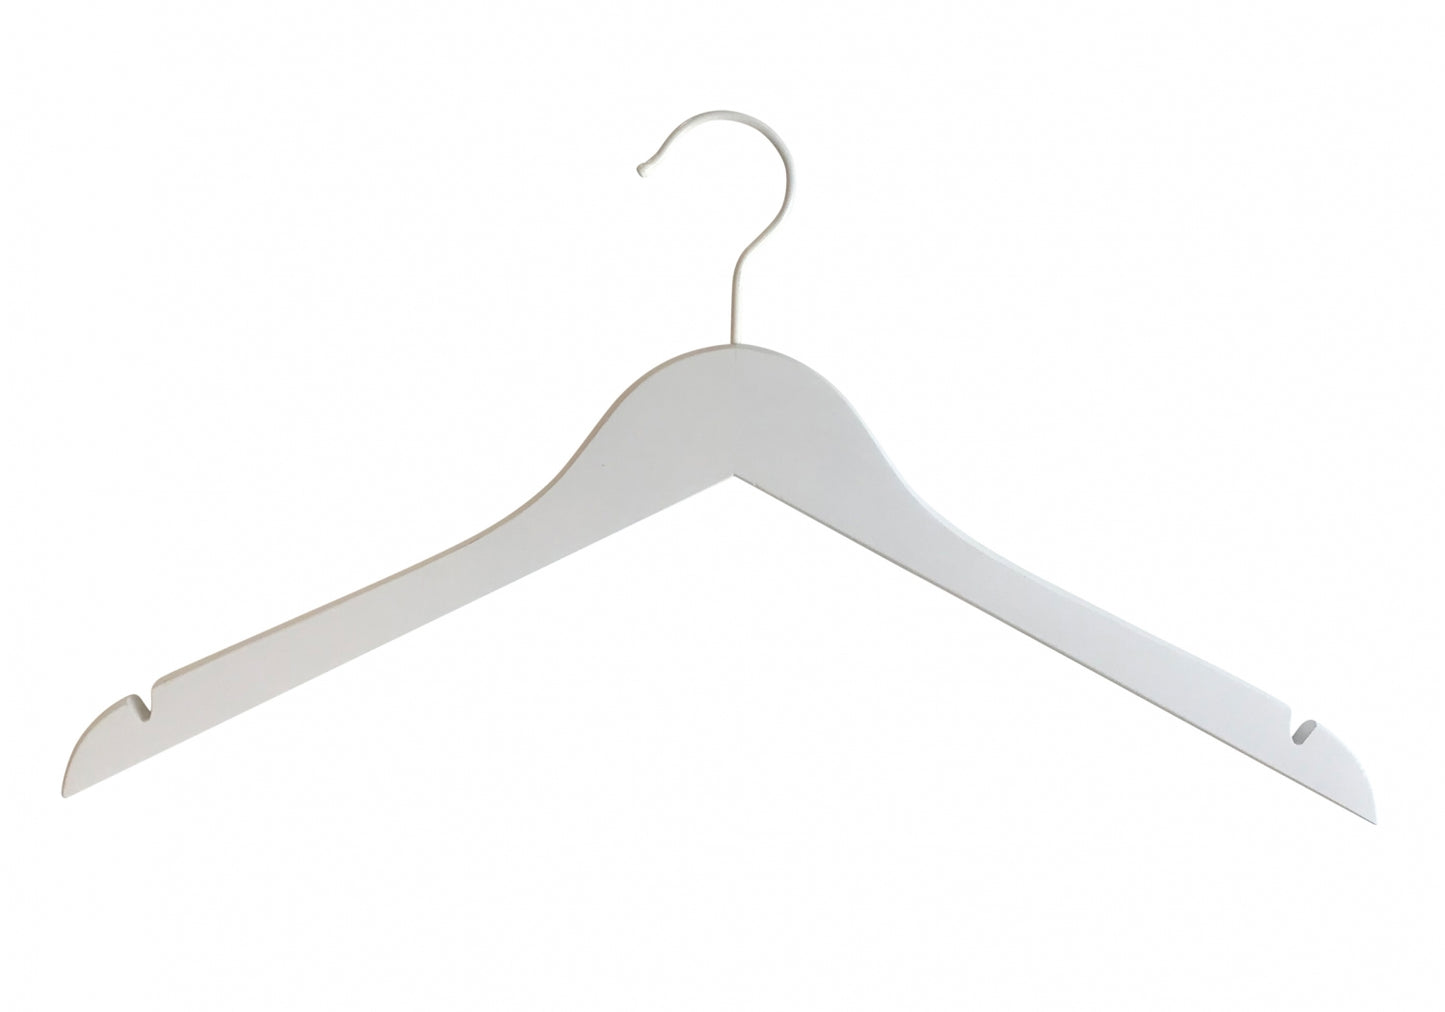 White Wooden Clothes Hanger with Notch 38cm